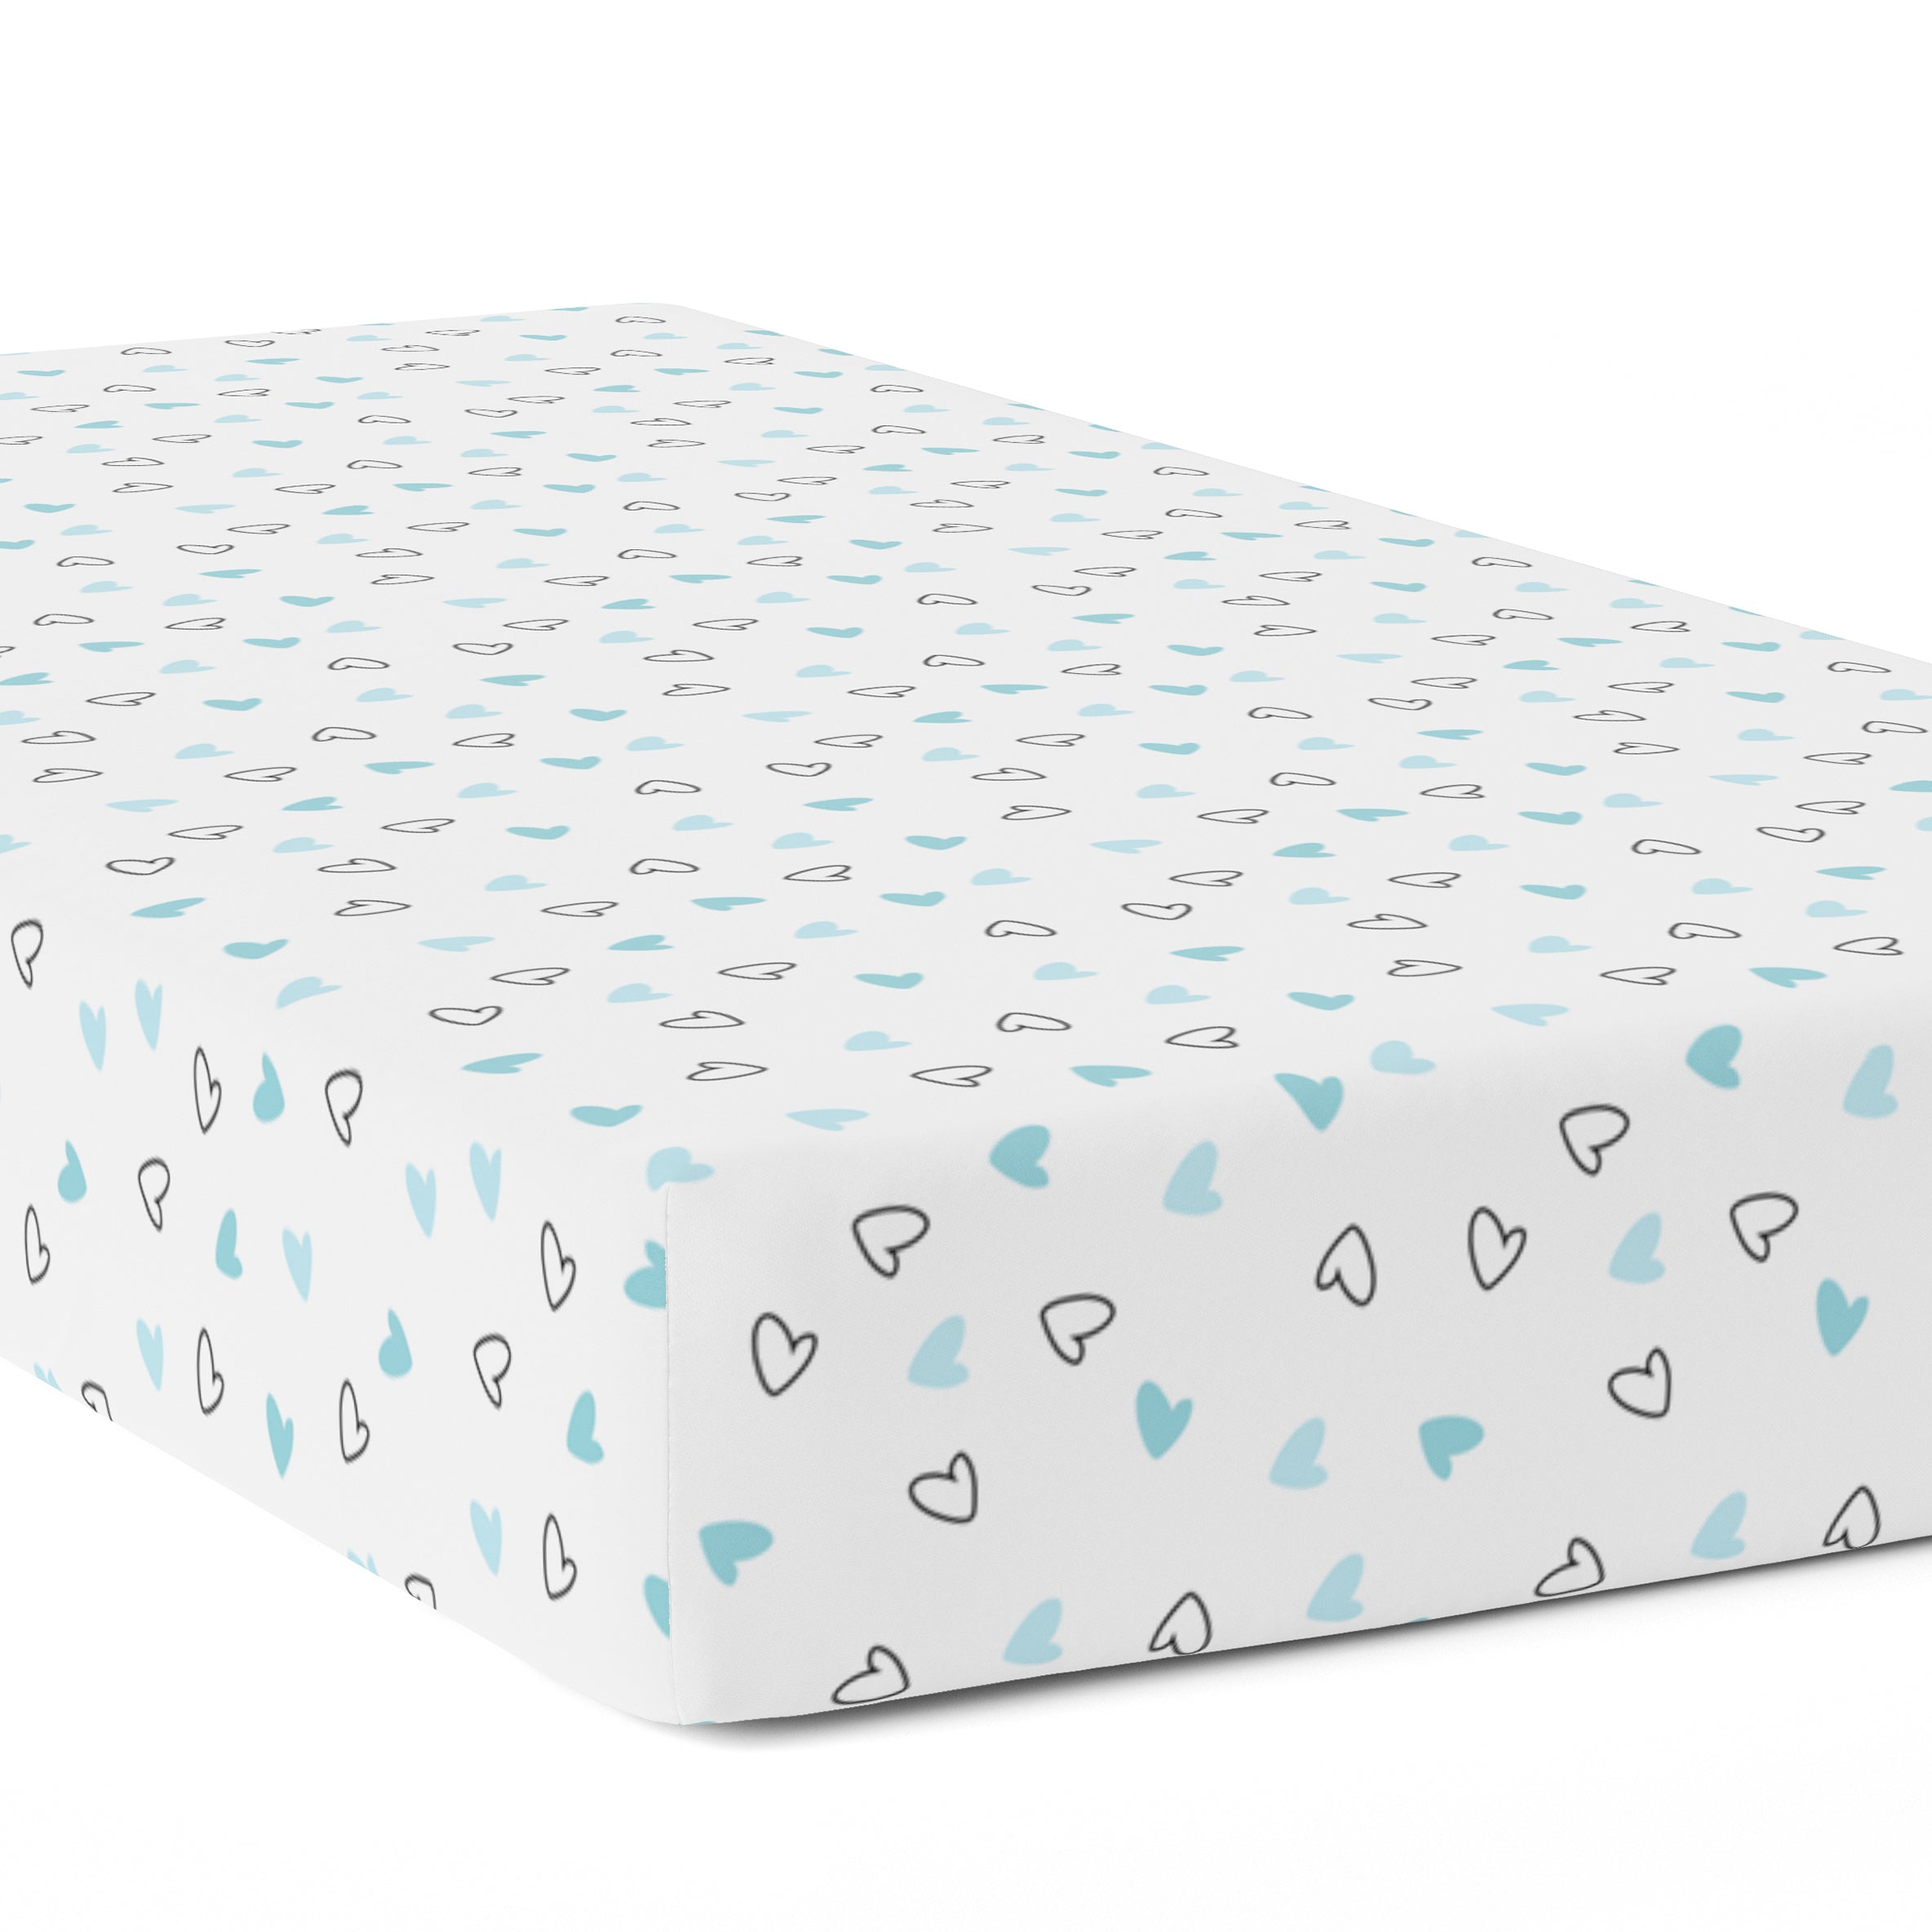 The White Cradle Pure Organic Cotton Fitted Cot Sheet for Baby Crib 28 x 52 inch - Blue Hearts (Large)